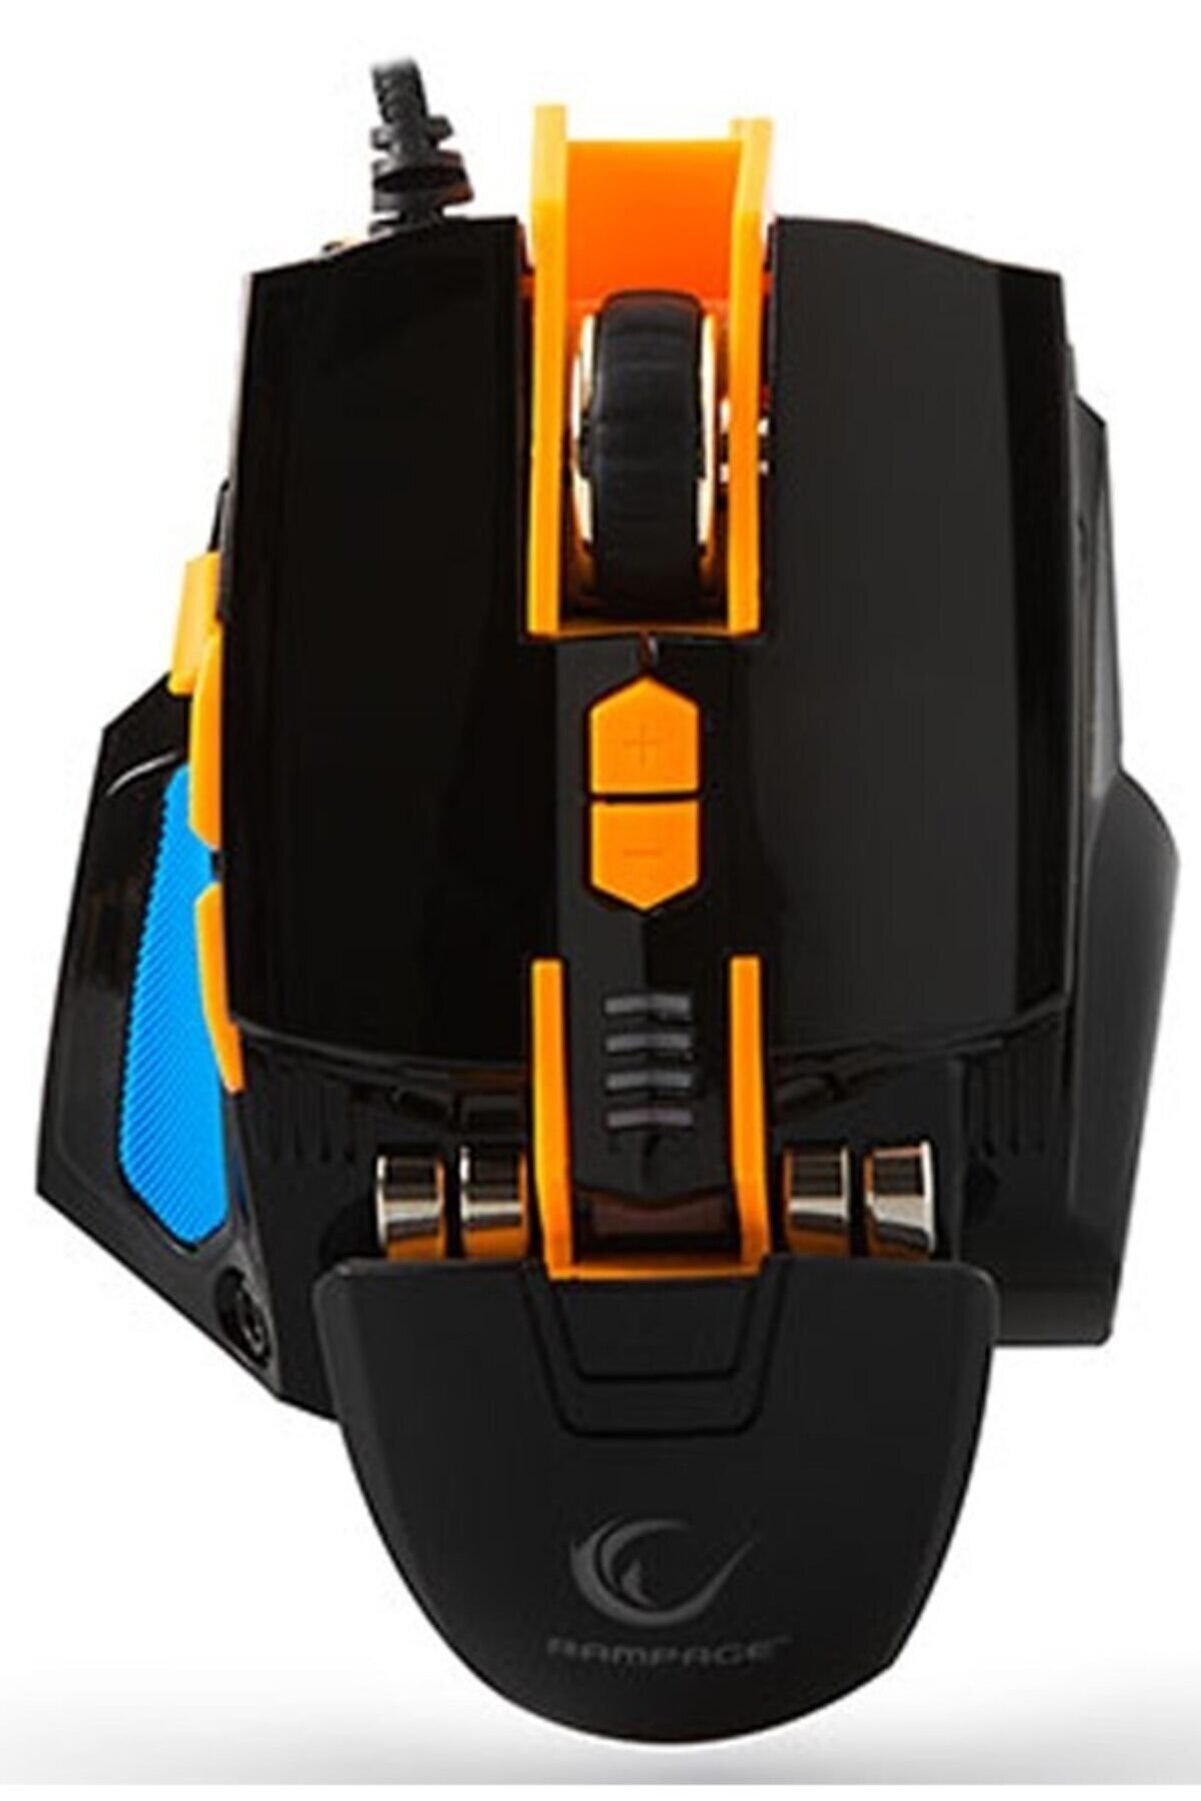 Rampage Smx-r4 Makrolu Gaminh Mouse Oyuncu Mouse